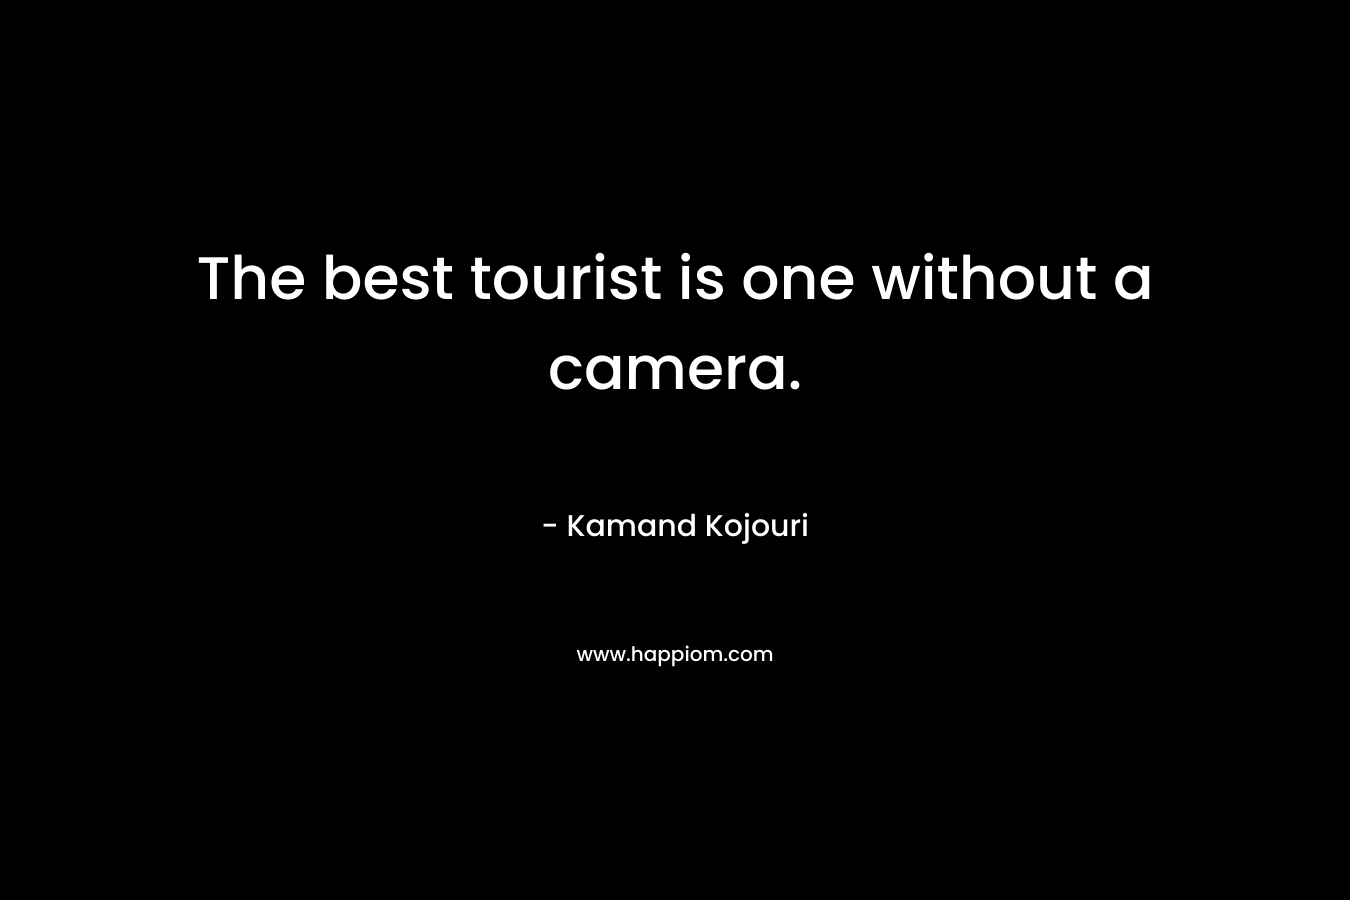 The best tourist is one without a camera.